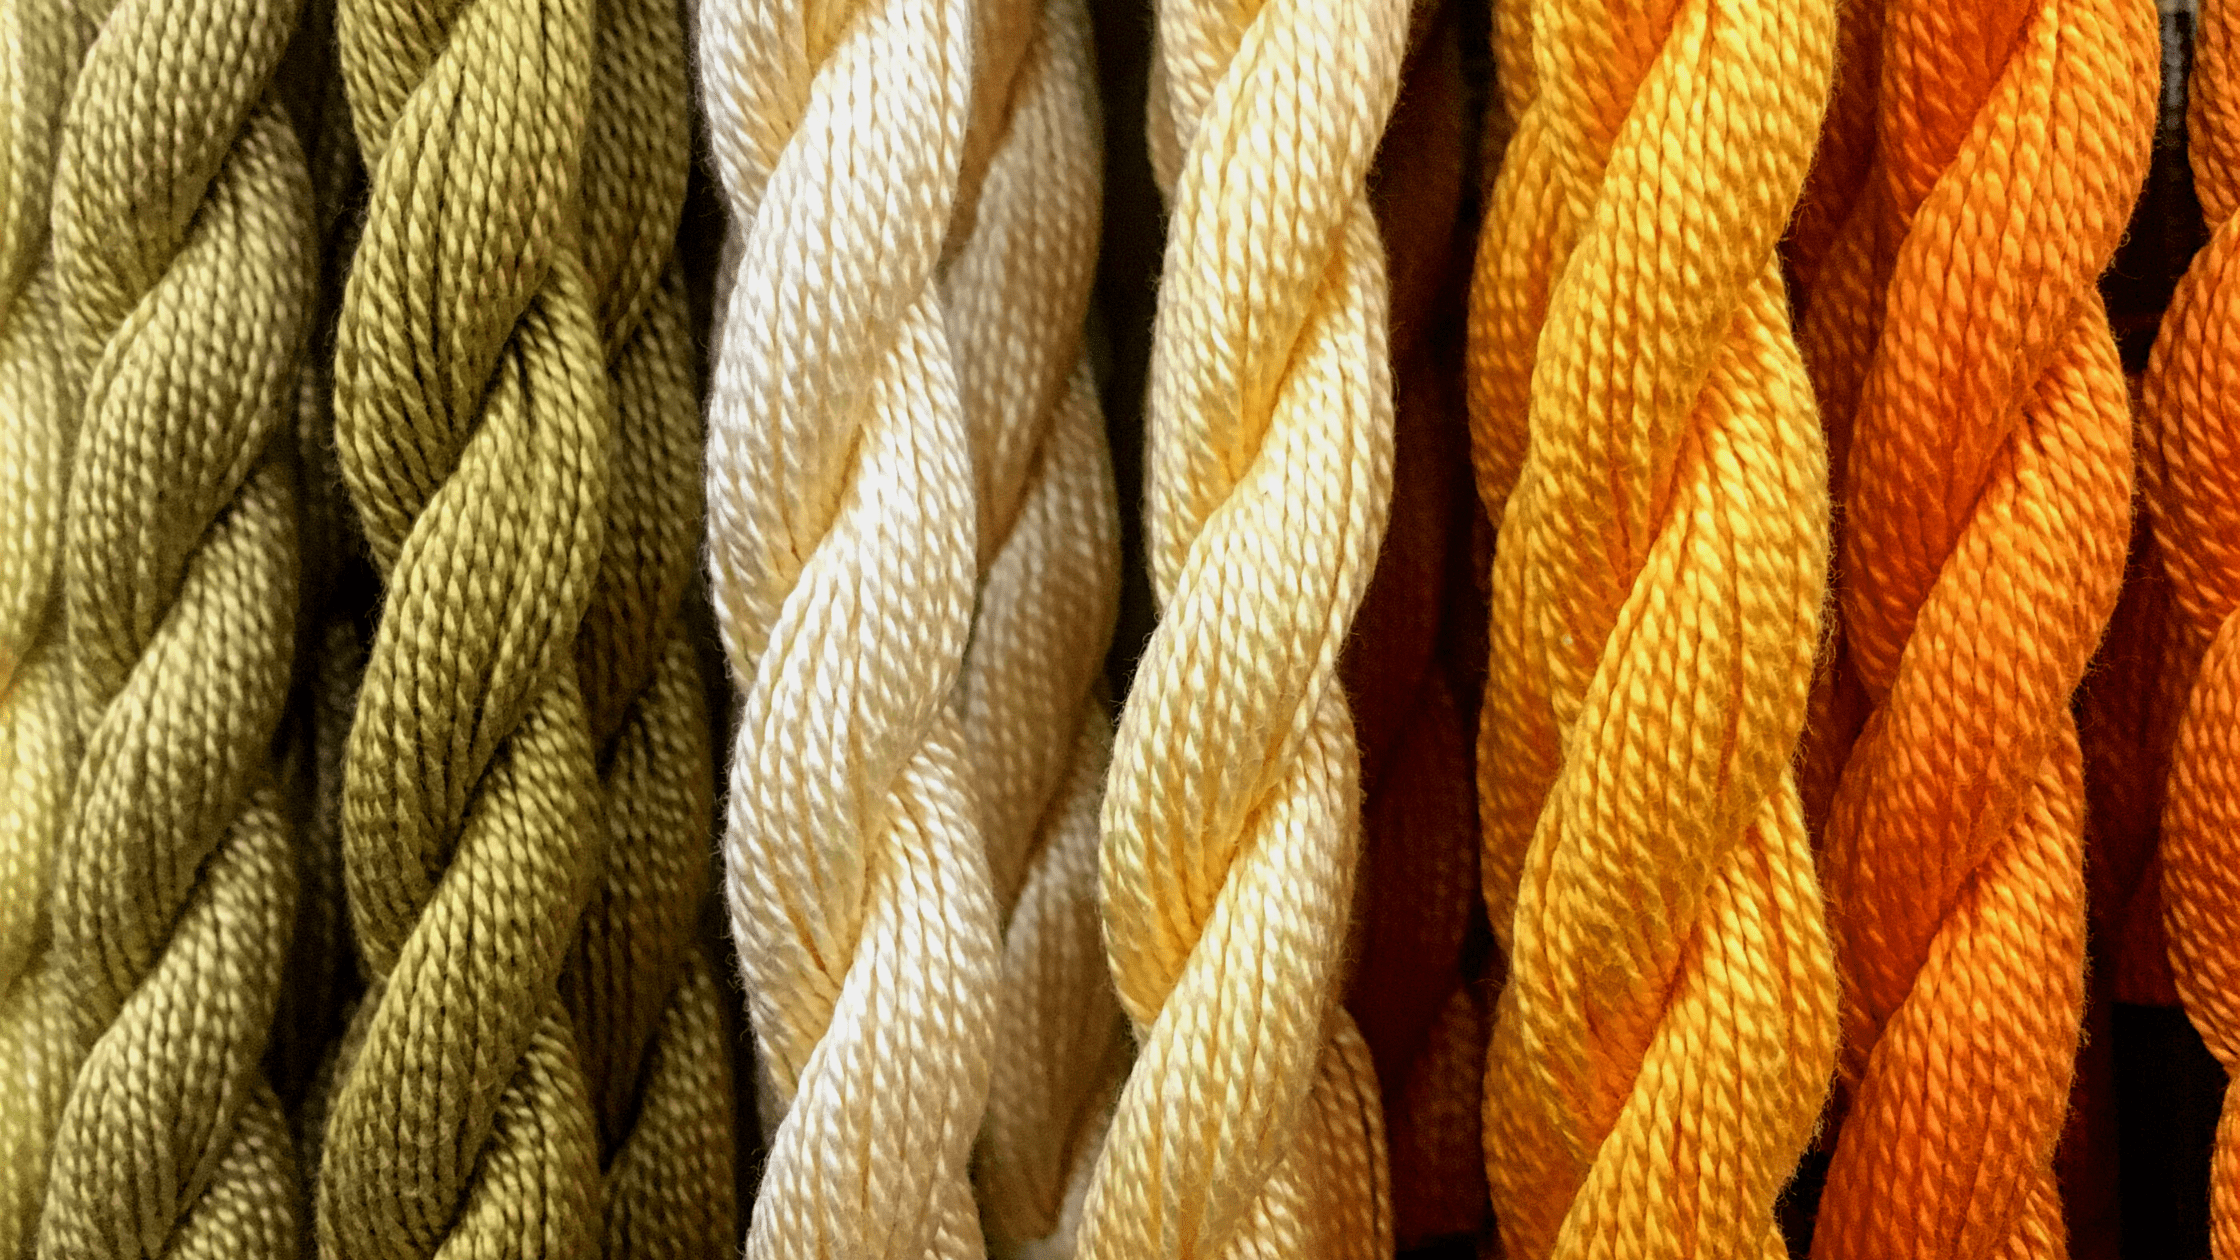 Threads, or fibers, representing relationships stronger together